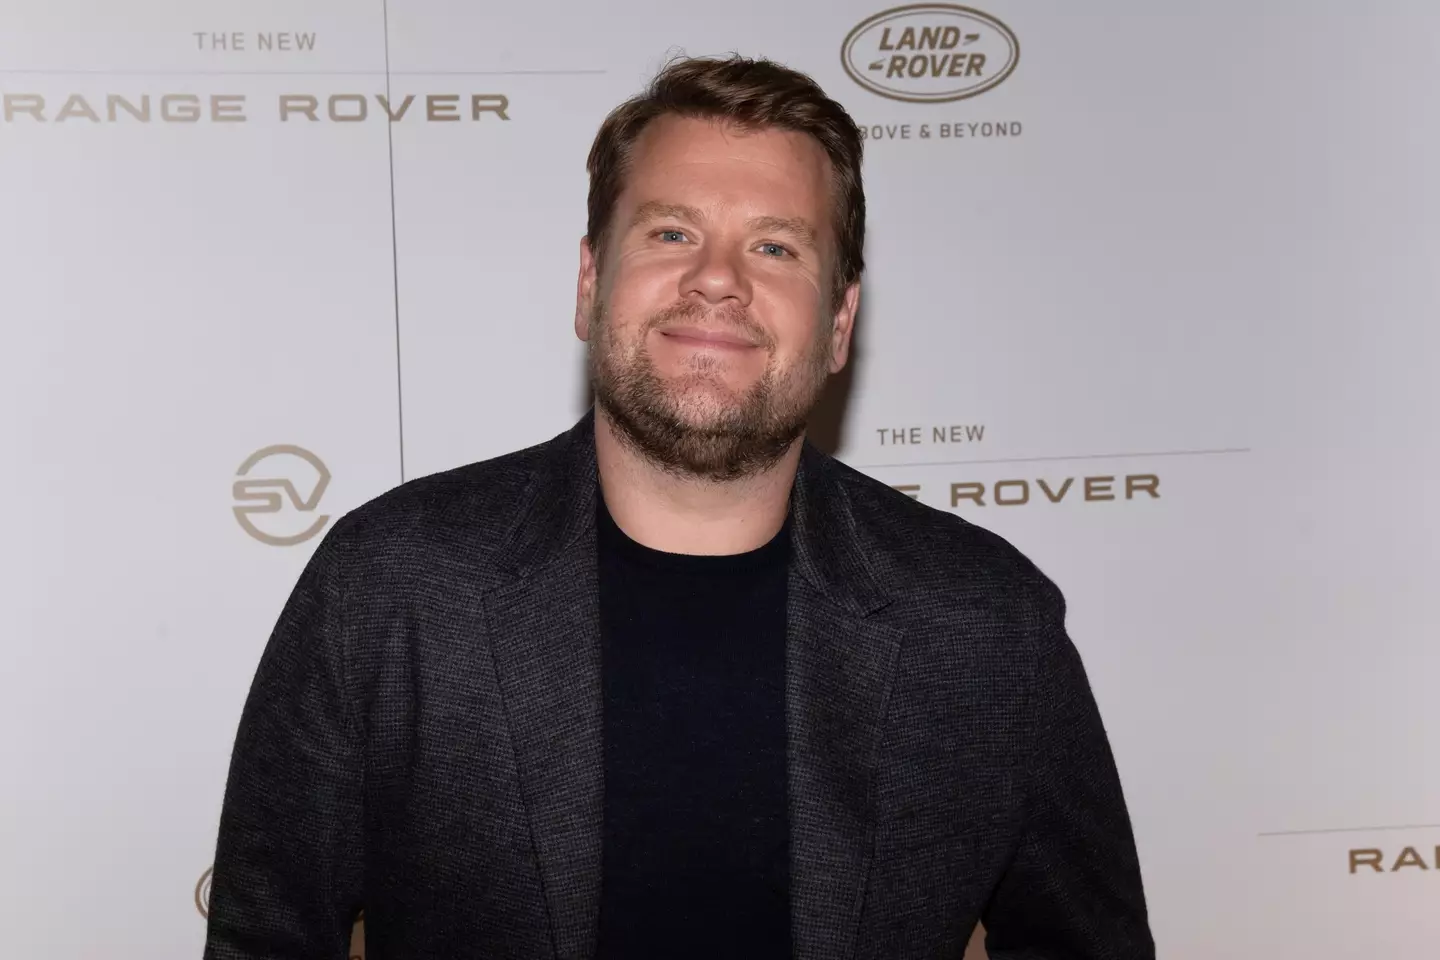 James Corden is set to leave his chat show next year.